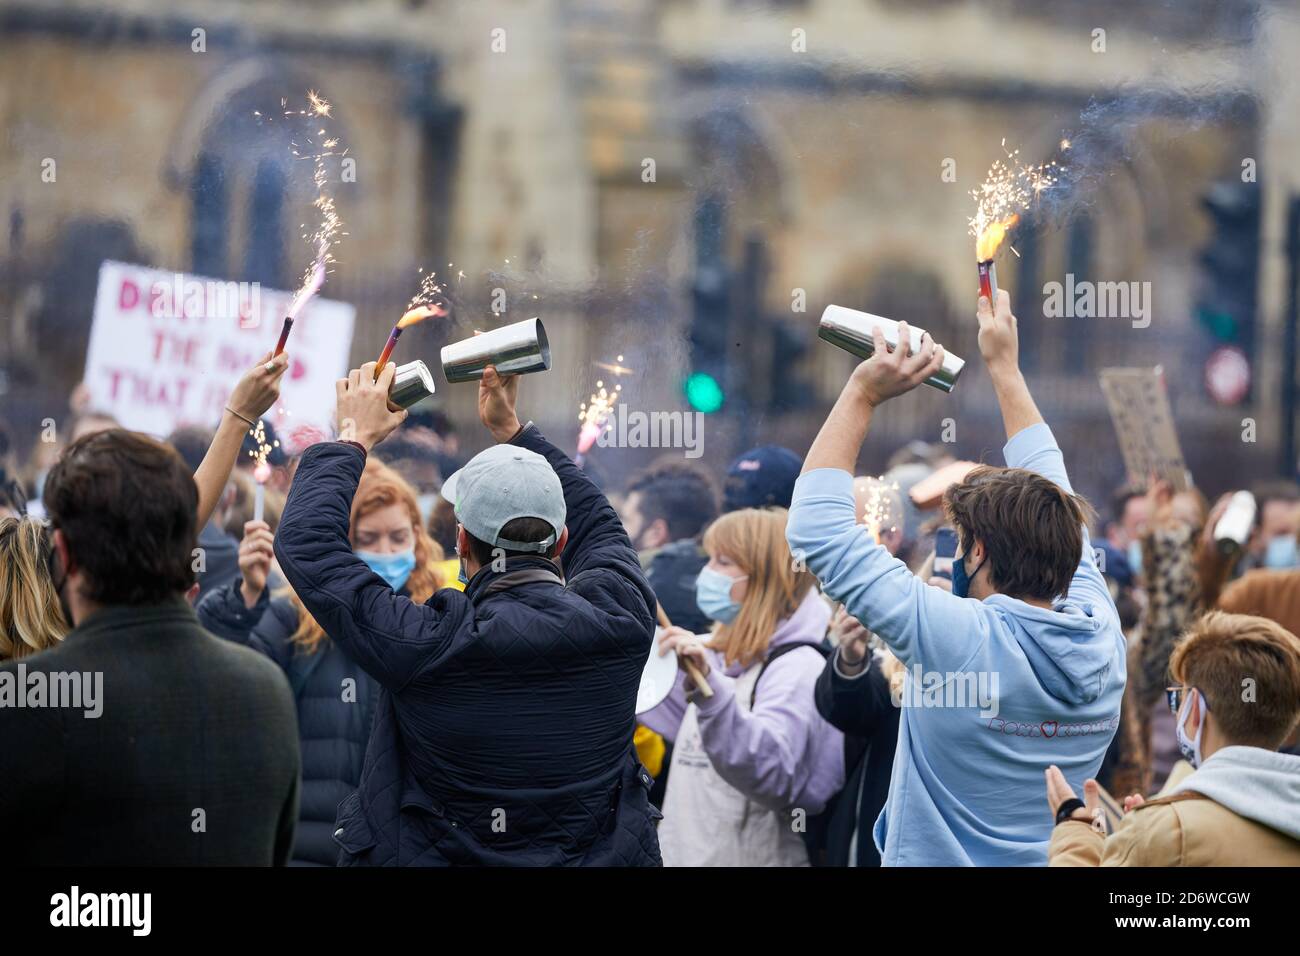 London, UK. - 19 Oct 2020: Hospitality workers protest in Parliament Square against the UK’s coronavirus restrictions, which they say will devastate their industry. Stock Photo